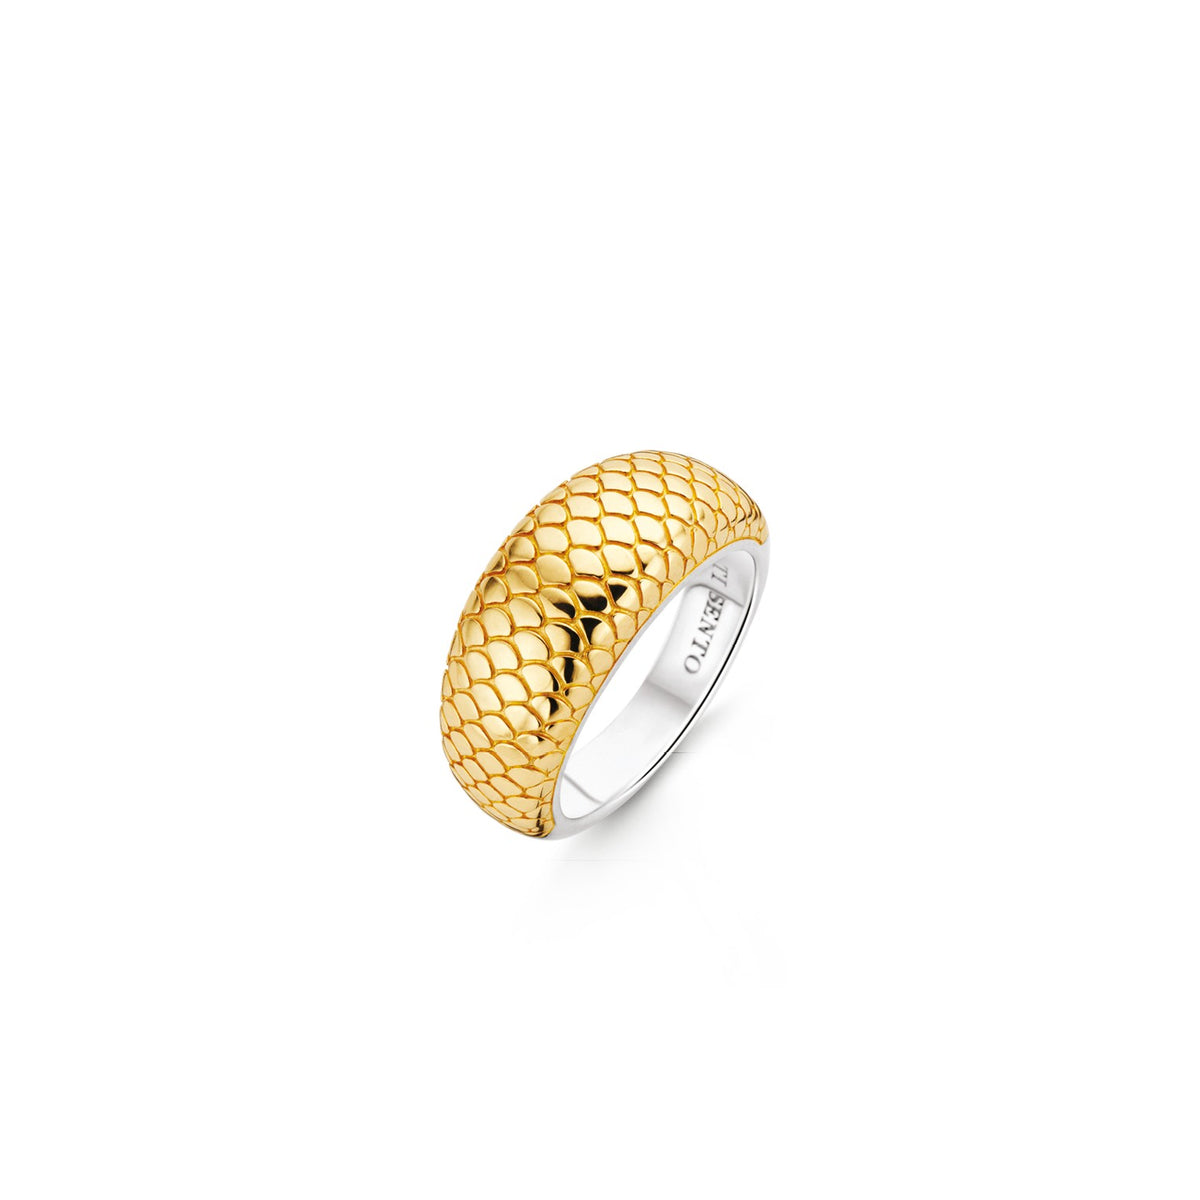 TI SENTO Sterling Silver Gold Tone Tapered Snake Print Ring 